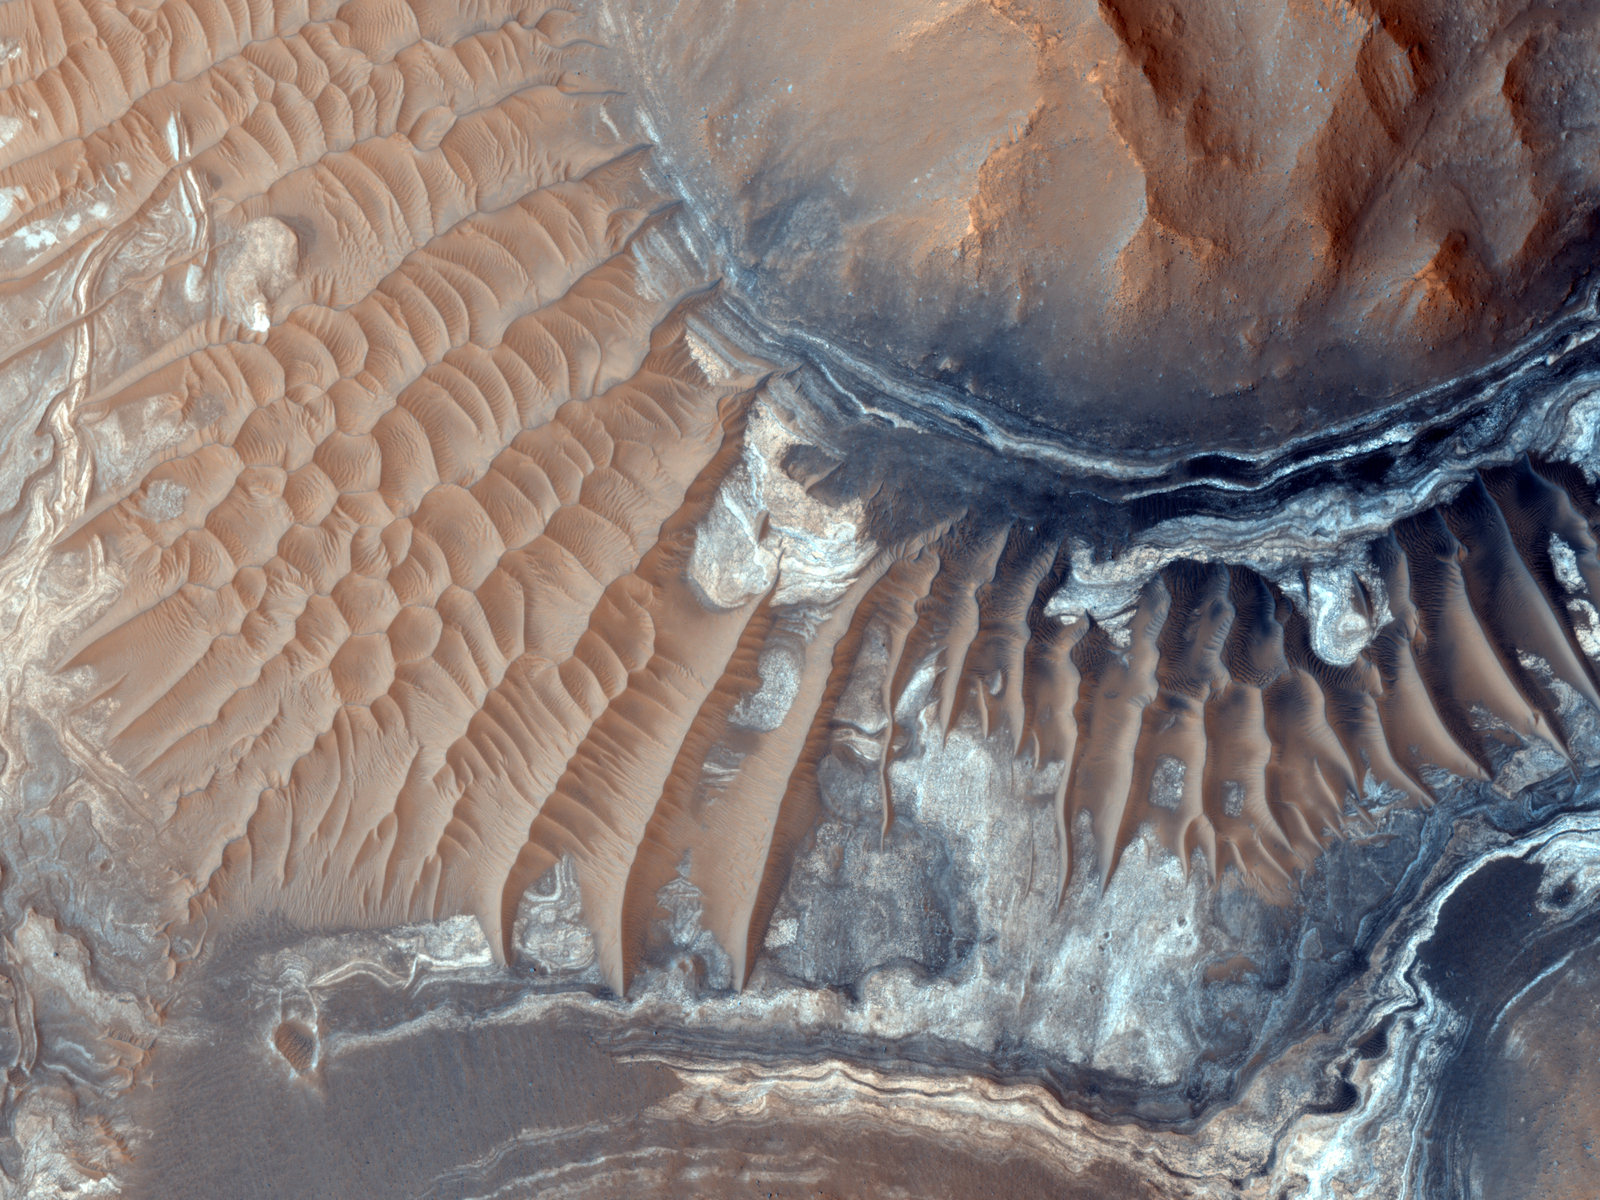 CRISM observations of this region of the Noctis Labyrinthus formation have shown indications of iron-bearing sulfates and phyllosilicate (clay) minerals.